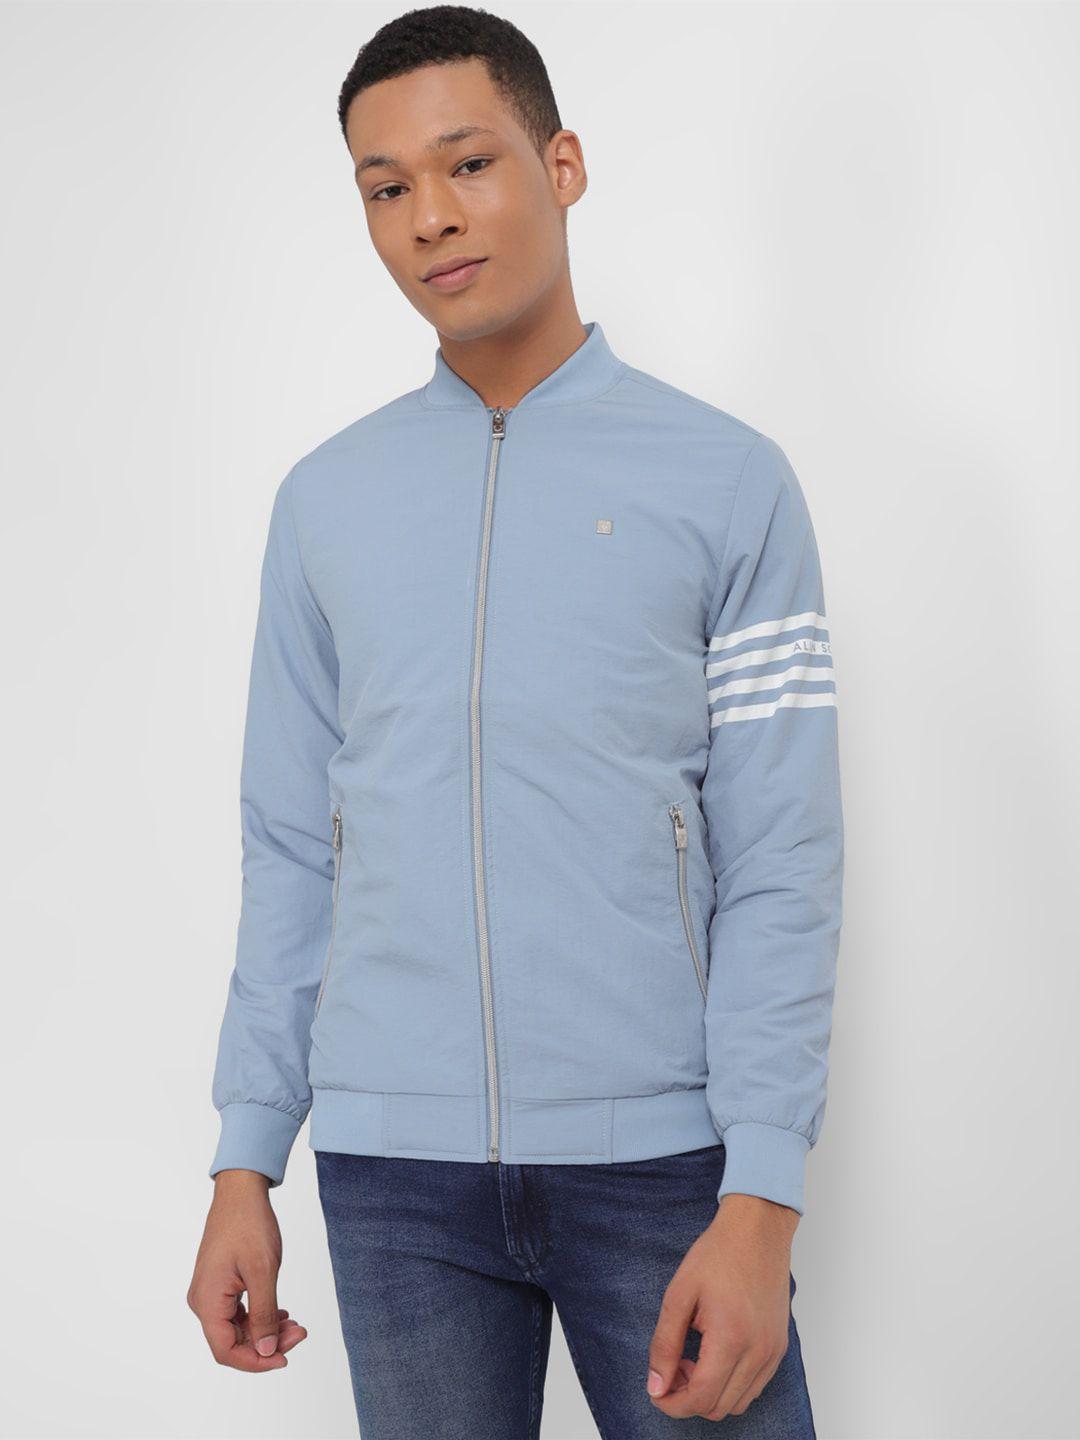 allen solly stand collar pure cotton sporty jacket